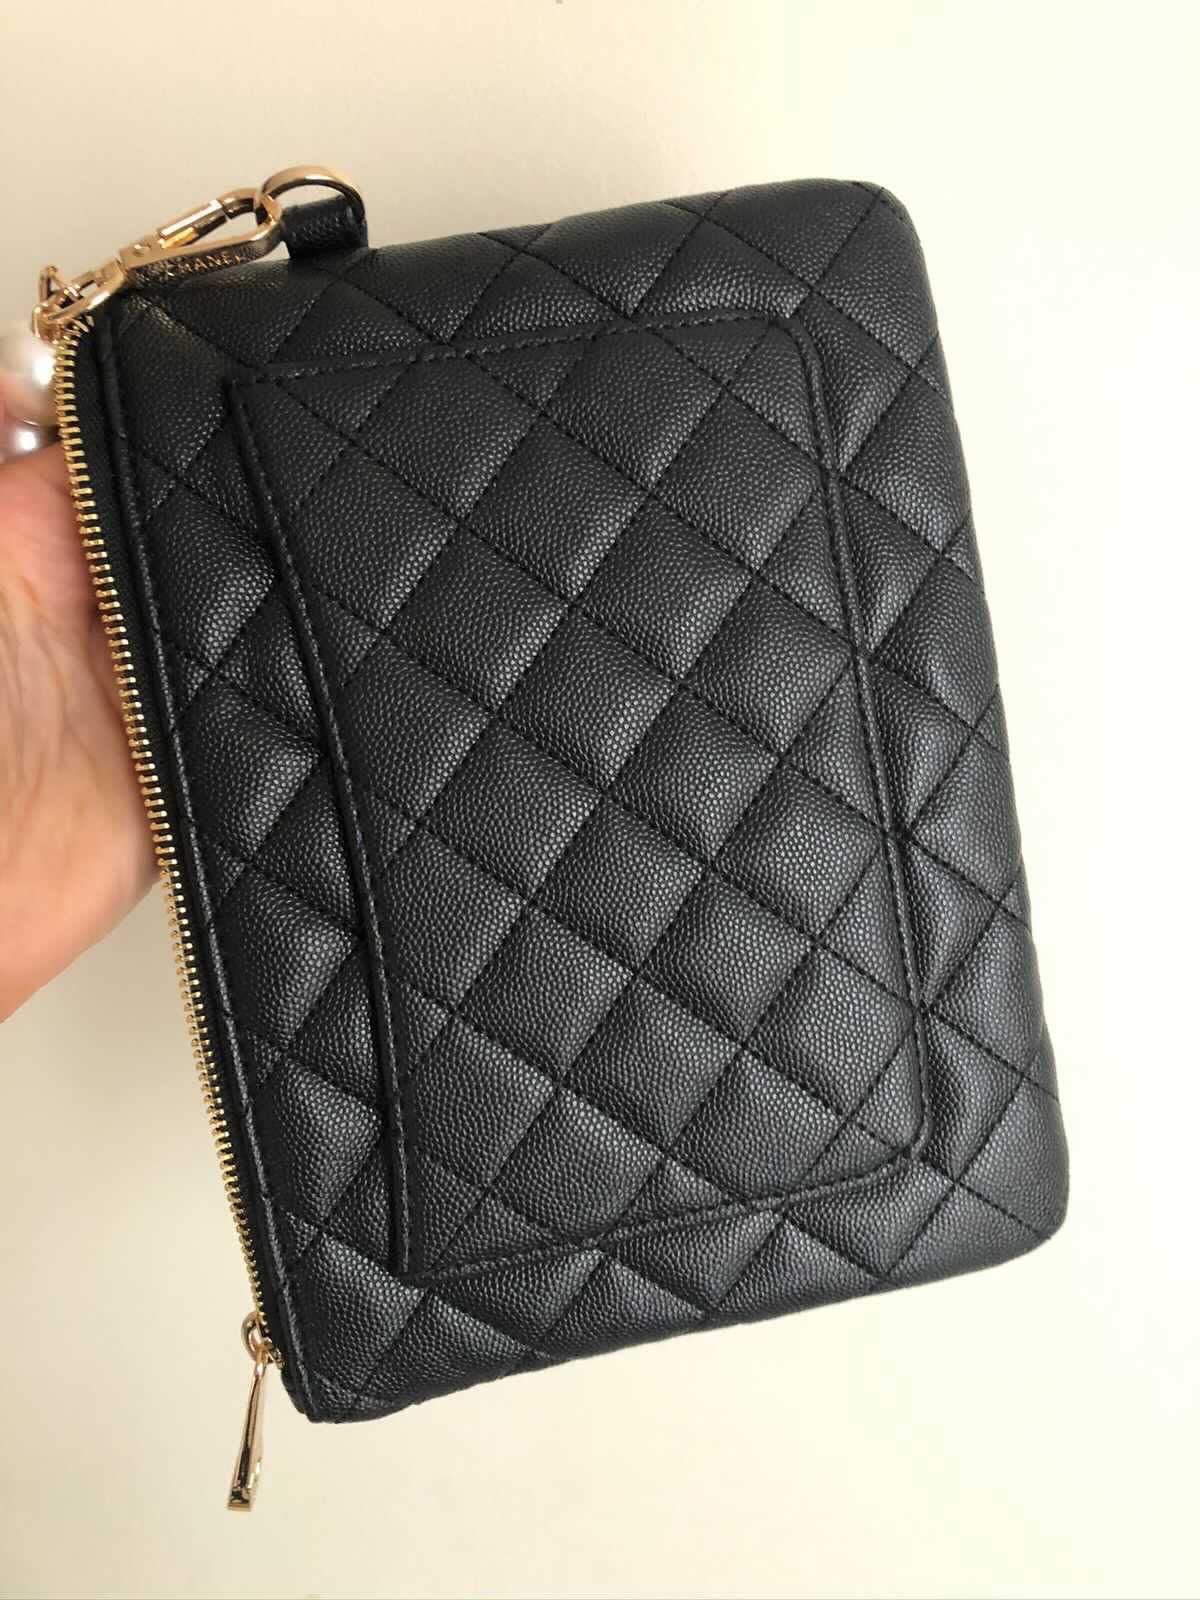 New Chanel Black Purse With A Pearl Hand Strap, Includes Chanel Box,  VIP GIFT